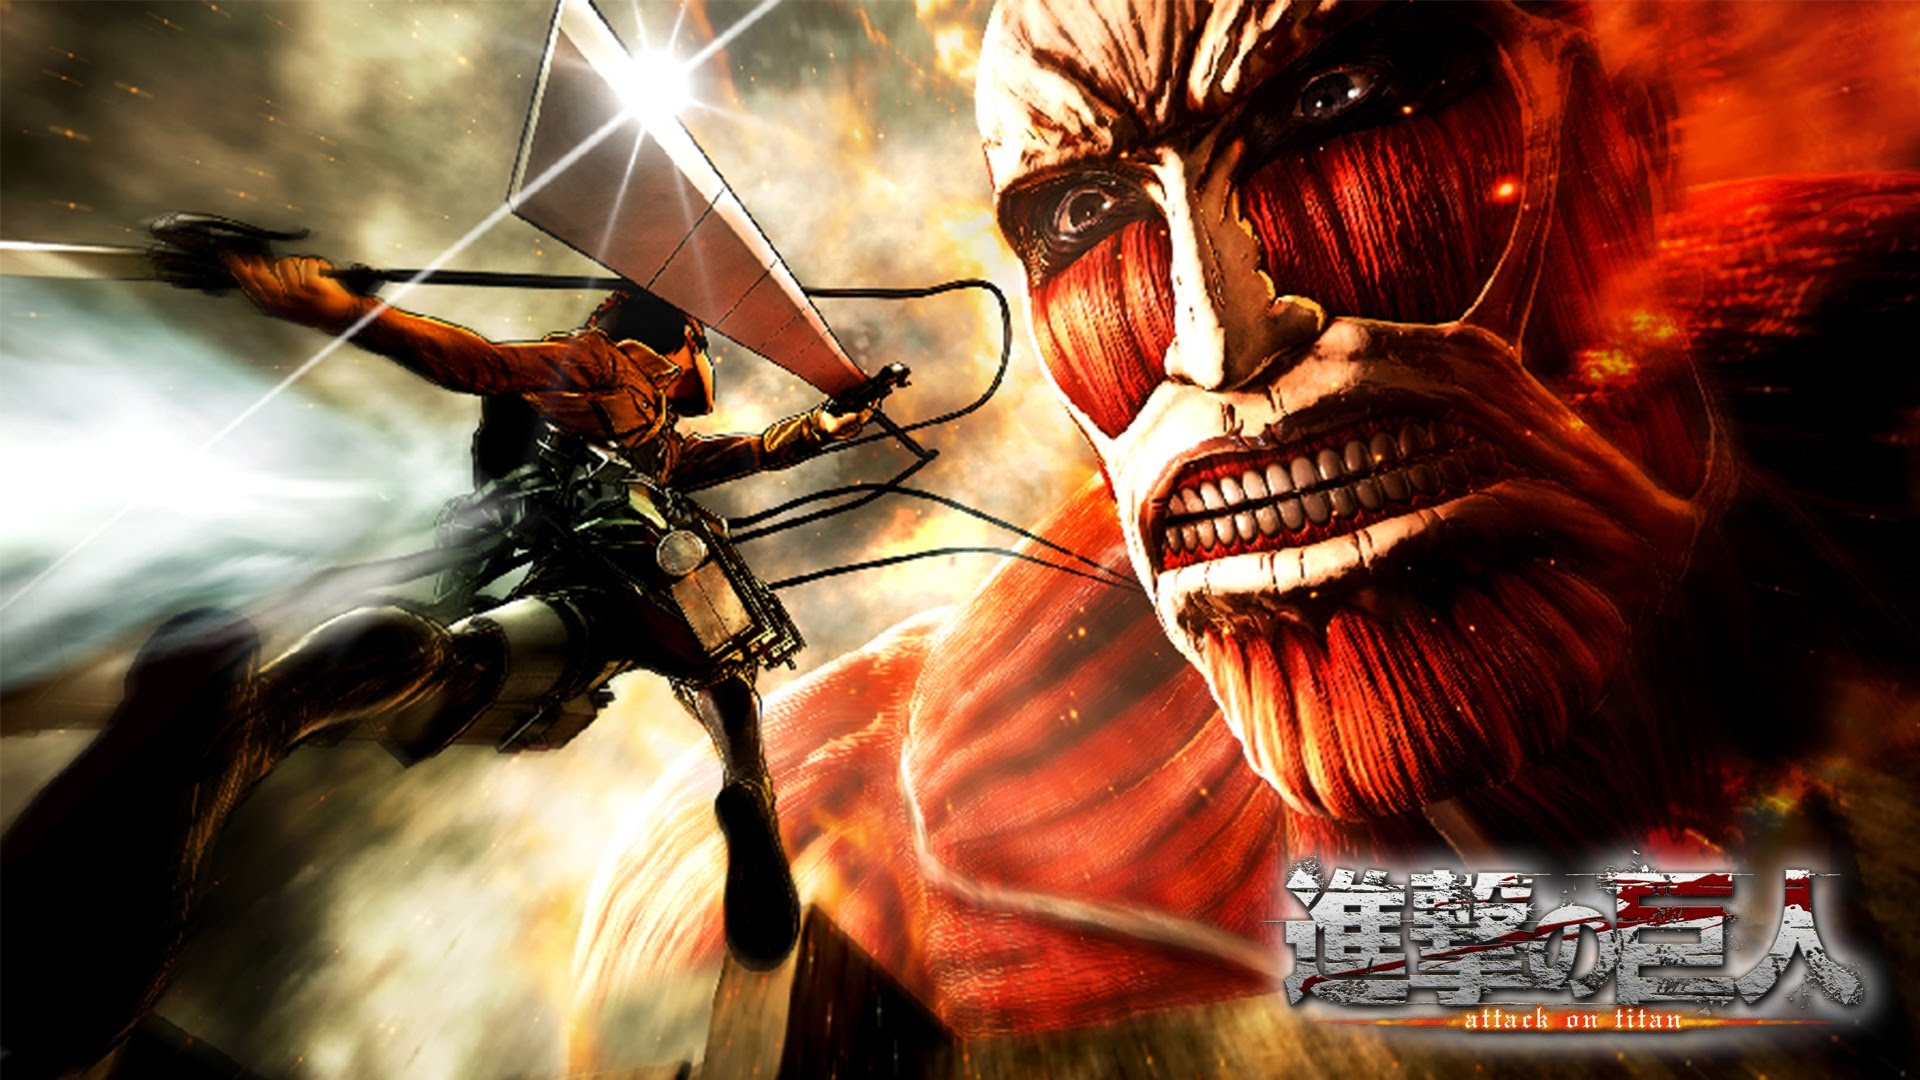 attack on titan wallpaper,action adventure game,pc game,games,illustration,fictional character